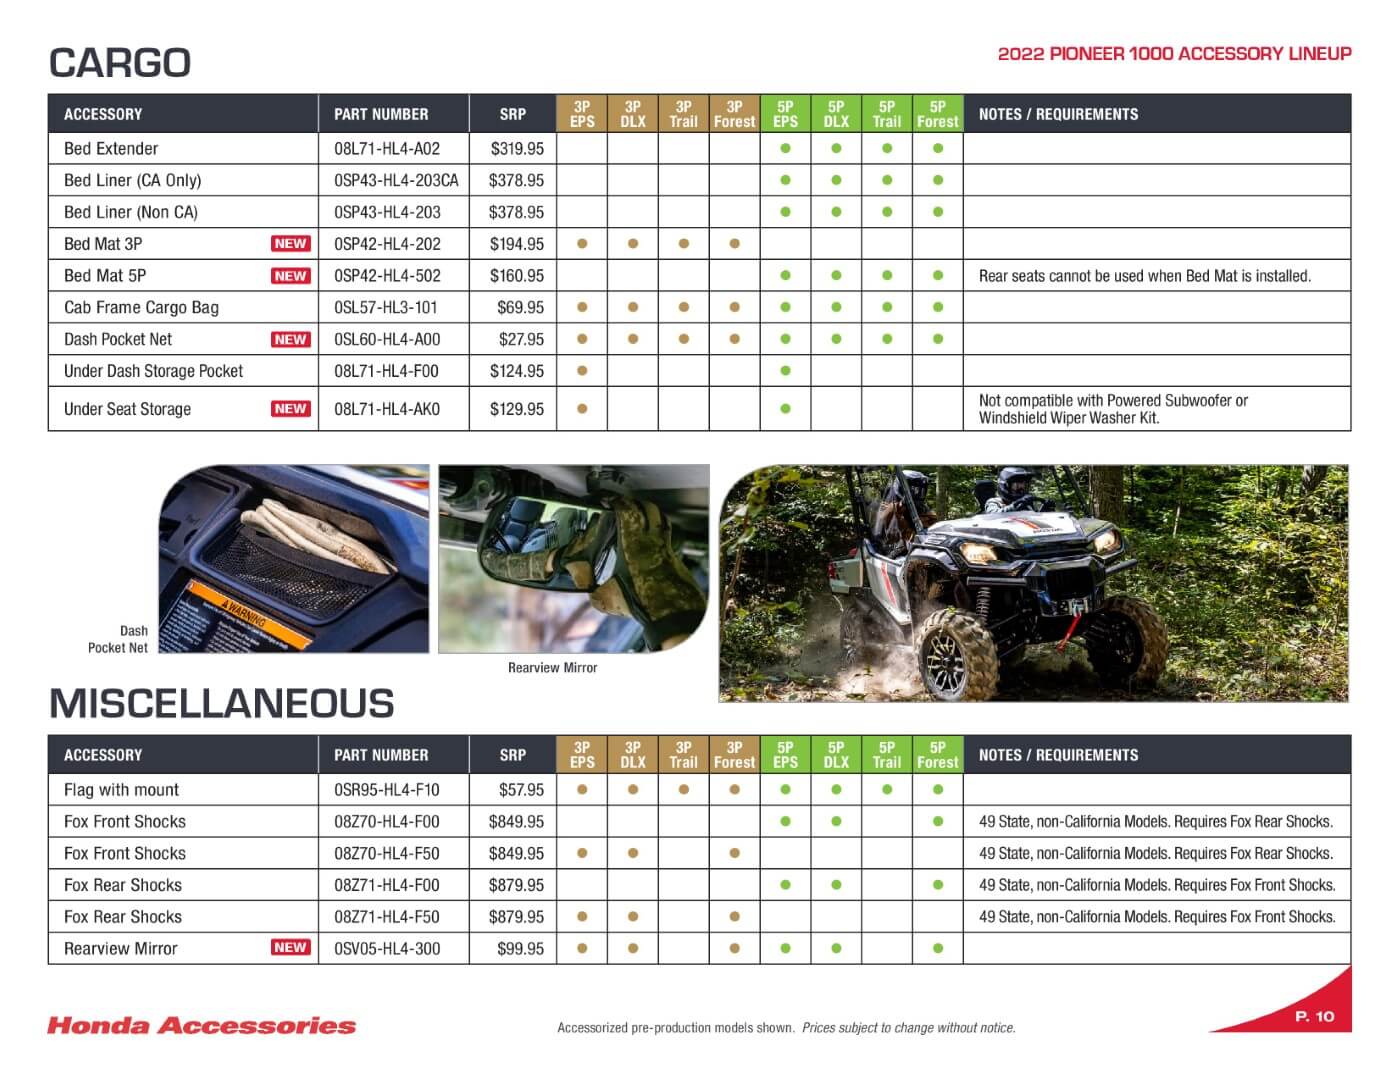 2022 Honda Pioneer 1000 Accessory Catalog / Accessories | Page 10 (including Pioneer 1000-5 Accessories)